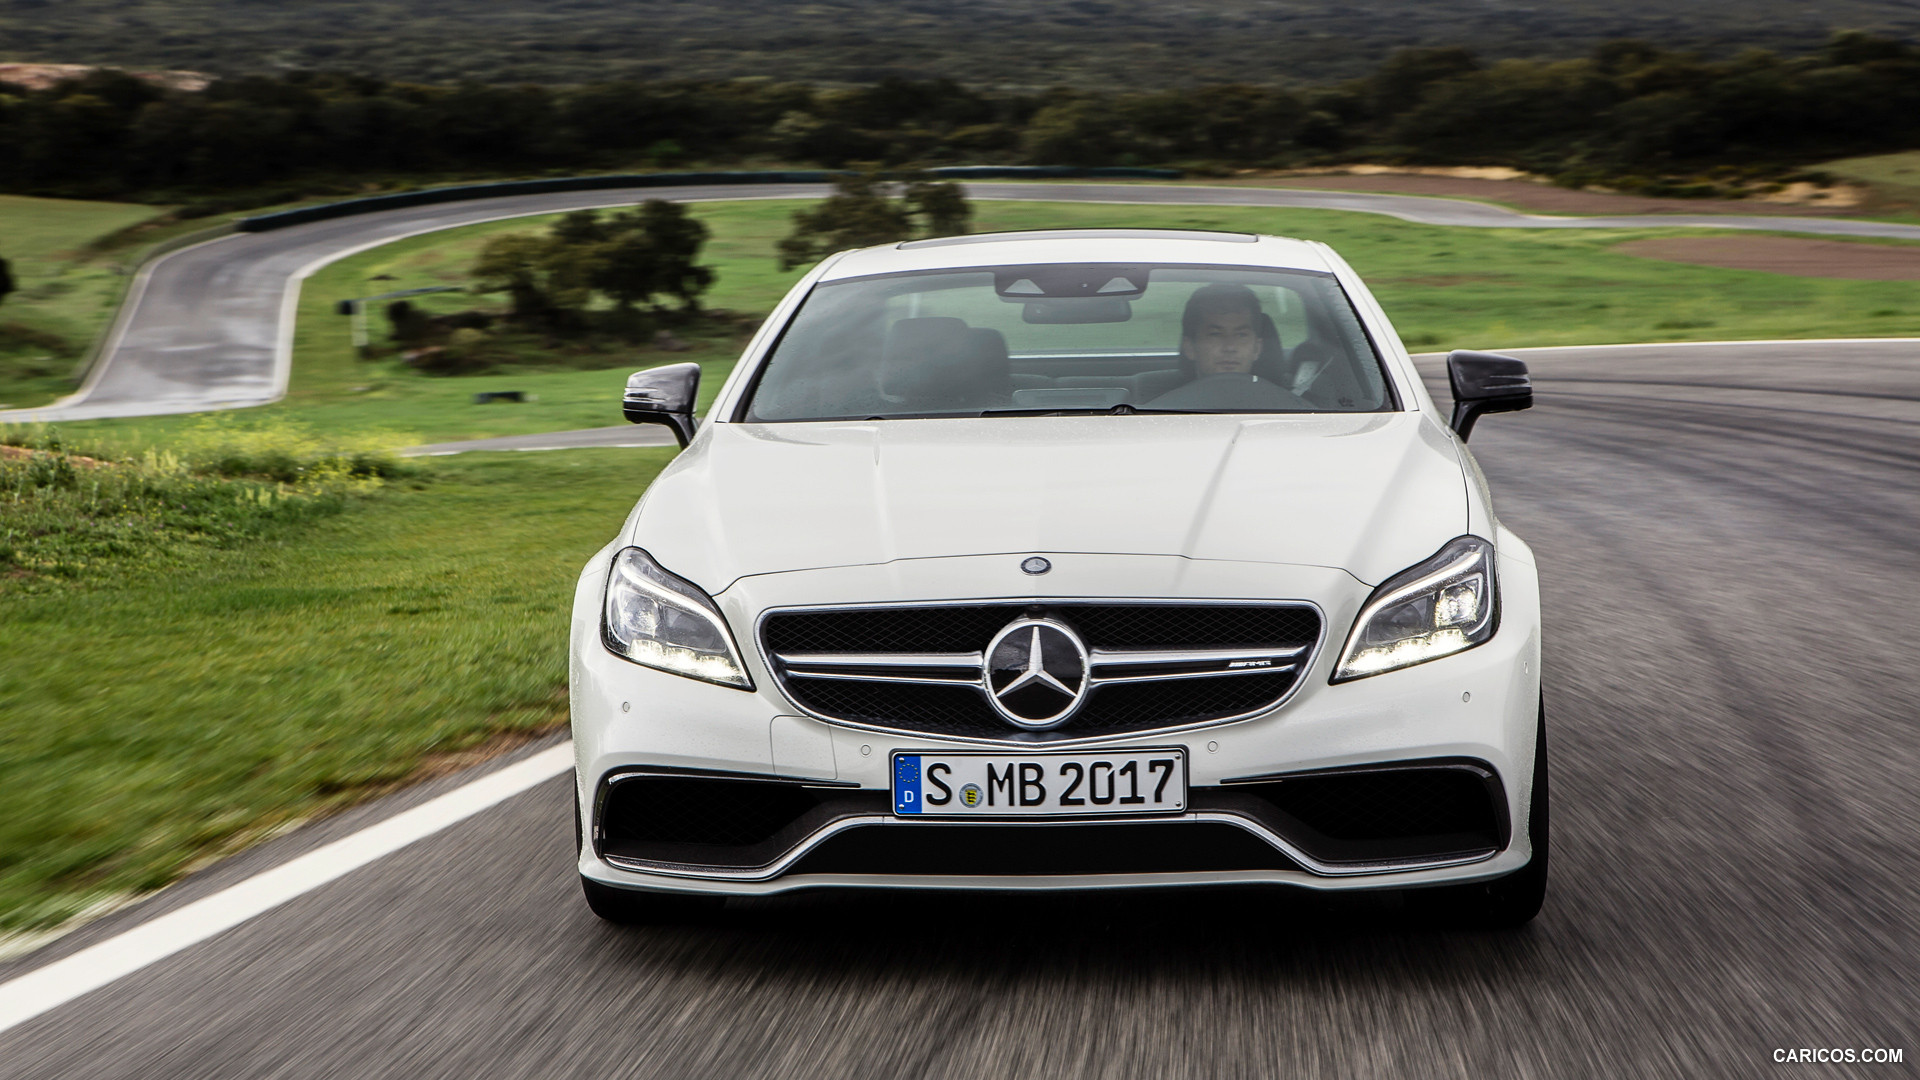 2015 Mercedes-Benz CLS 63 AMG S-Model - Front, #3 of 51